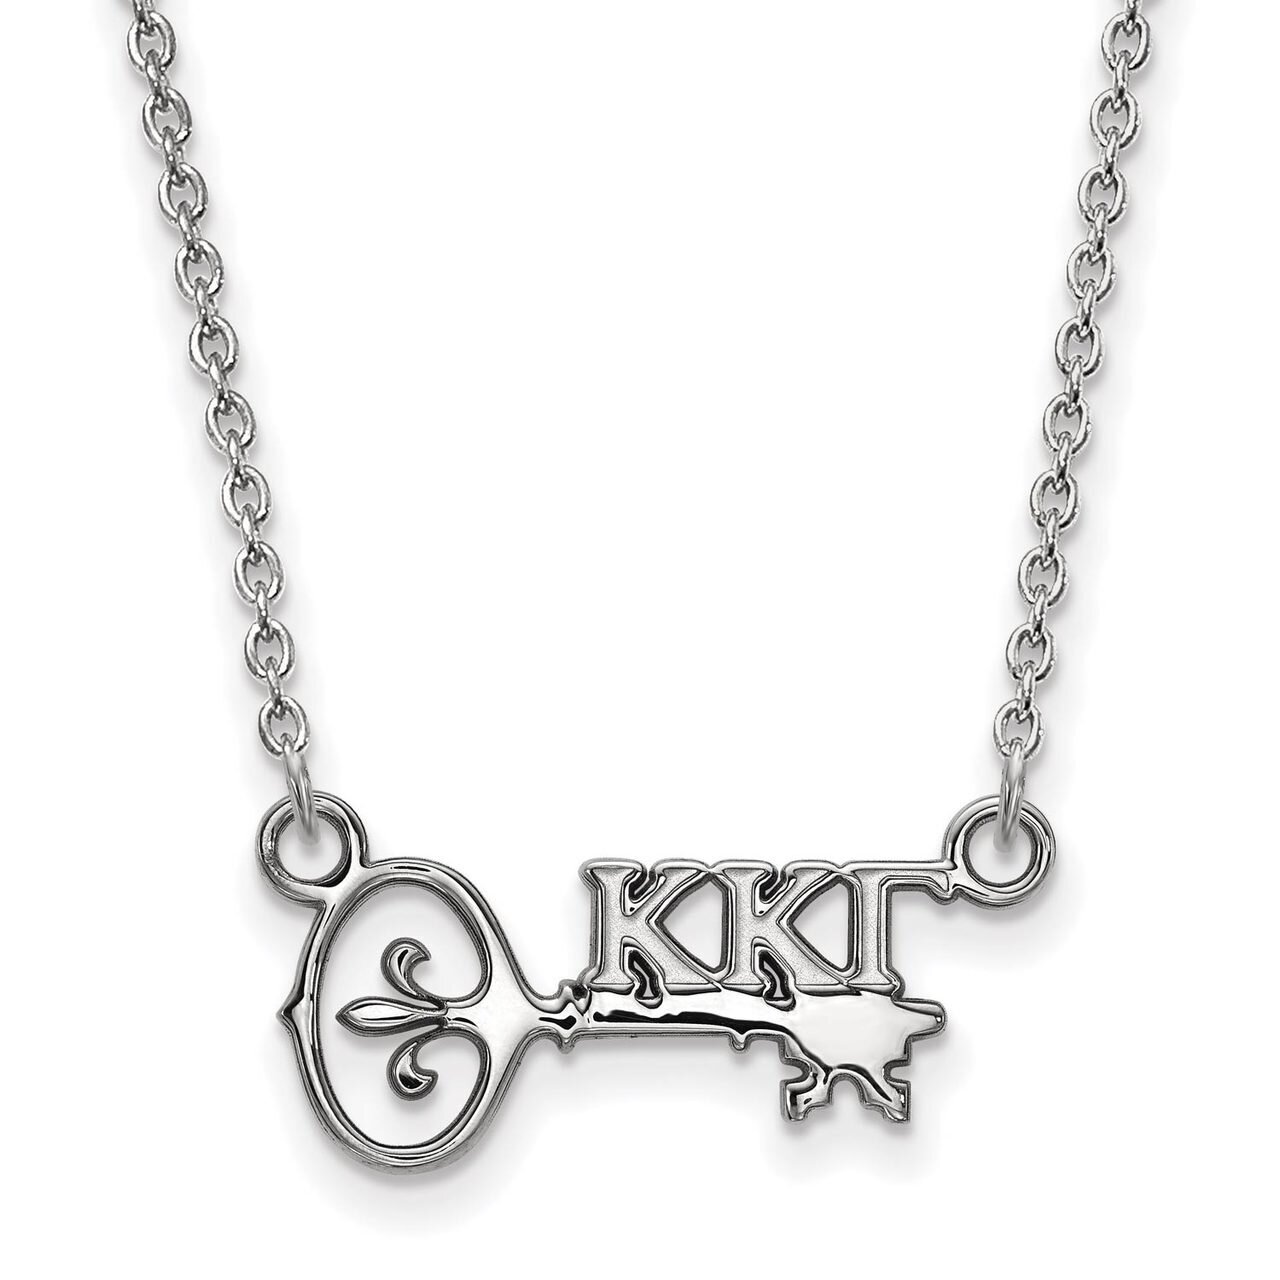 Kappa Kappa Gamma Extra Small Pendant with 18 Inch Chain Sterling Silver SS039KKG-18